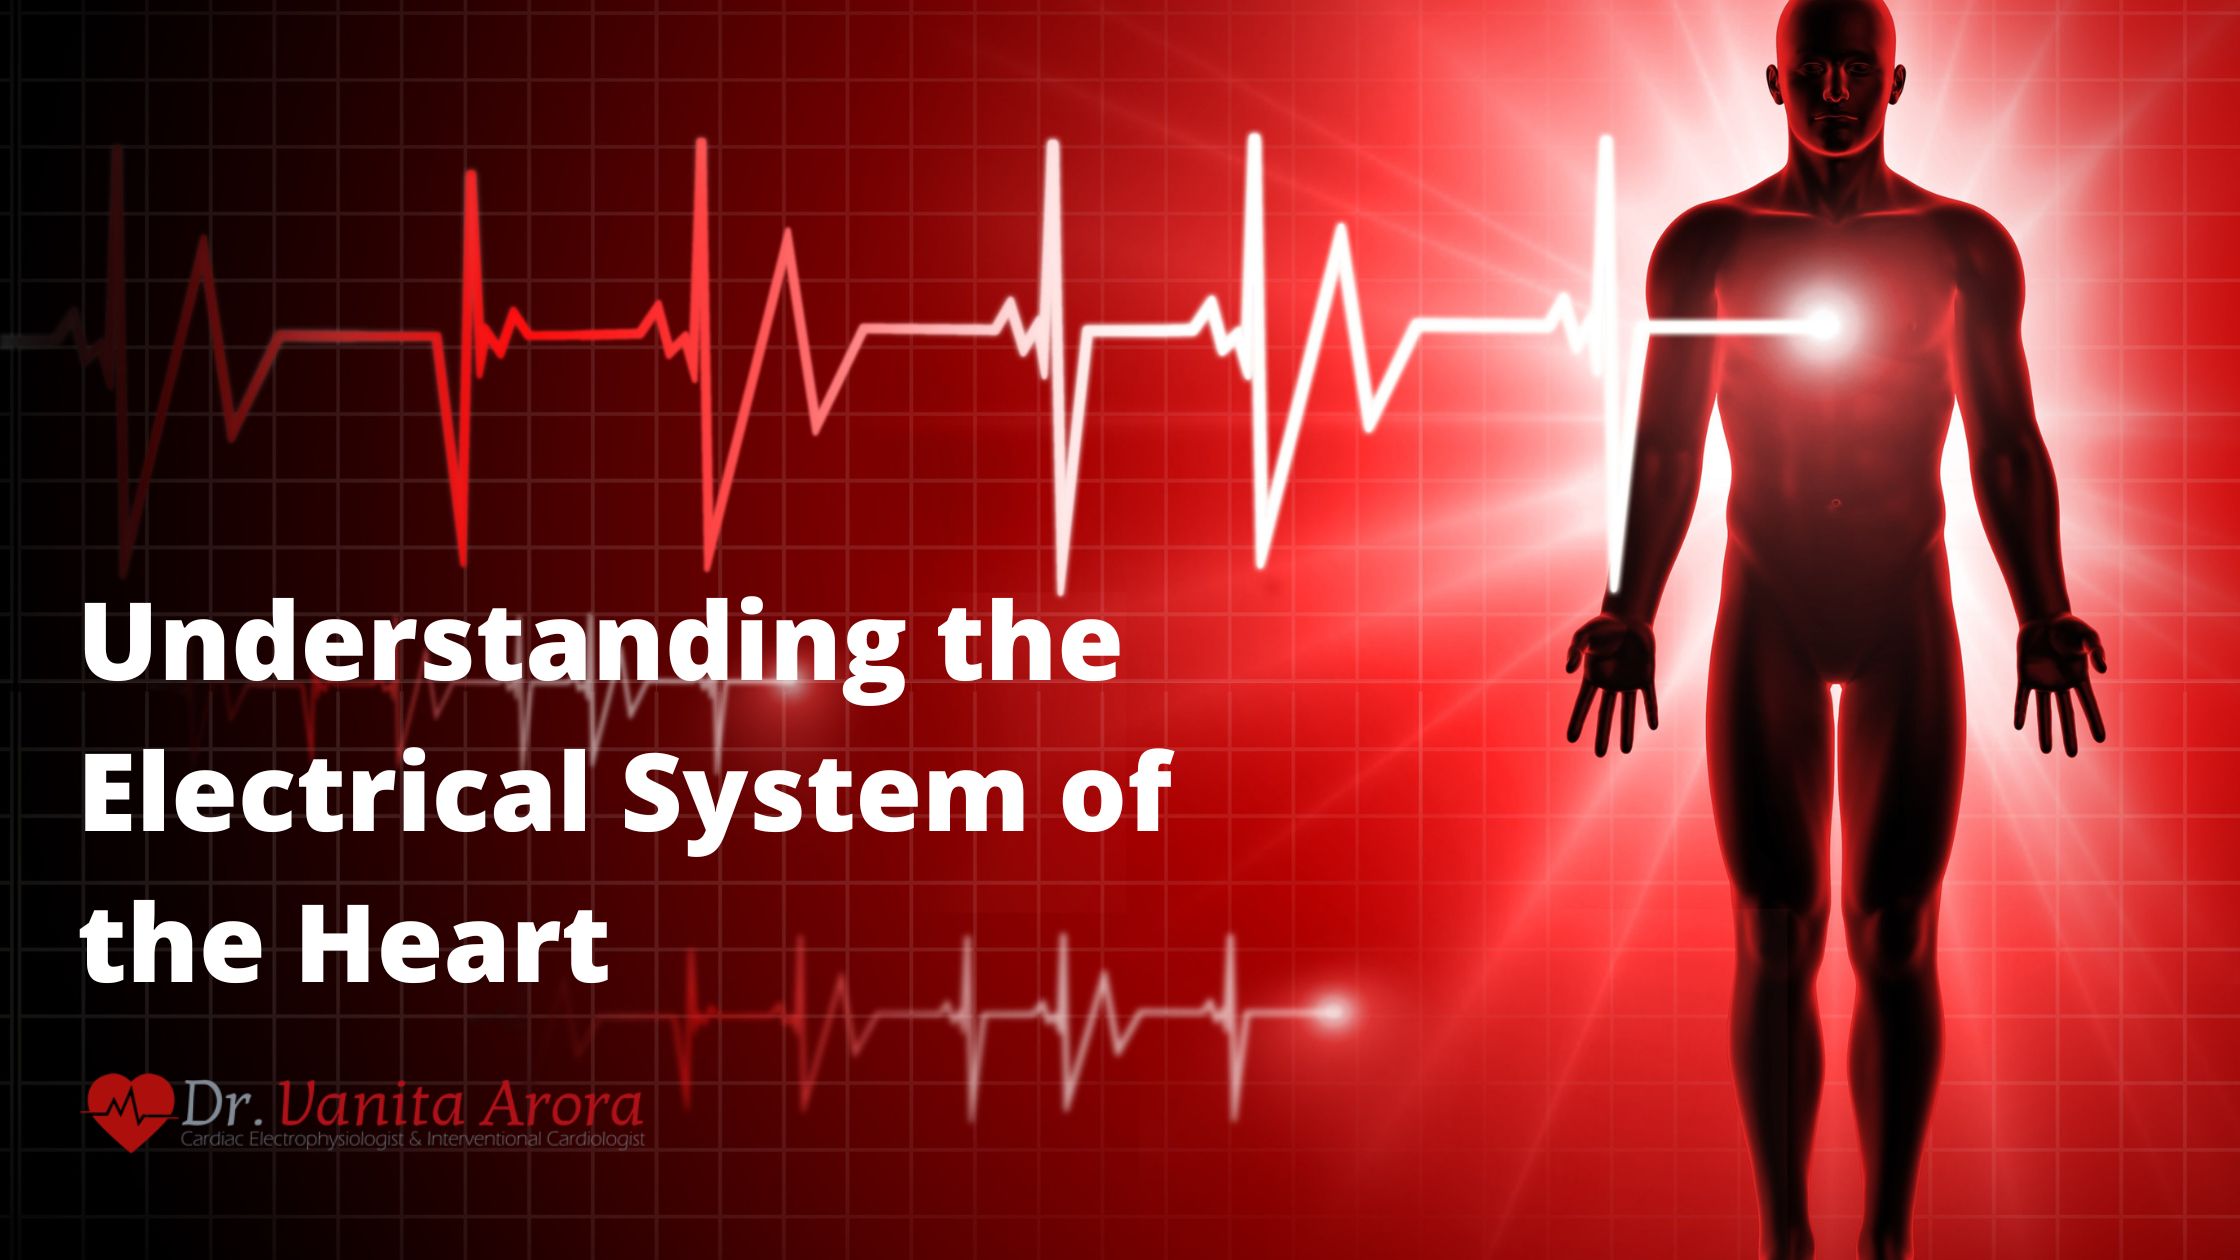 Understanding the Electrical System of the Heart